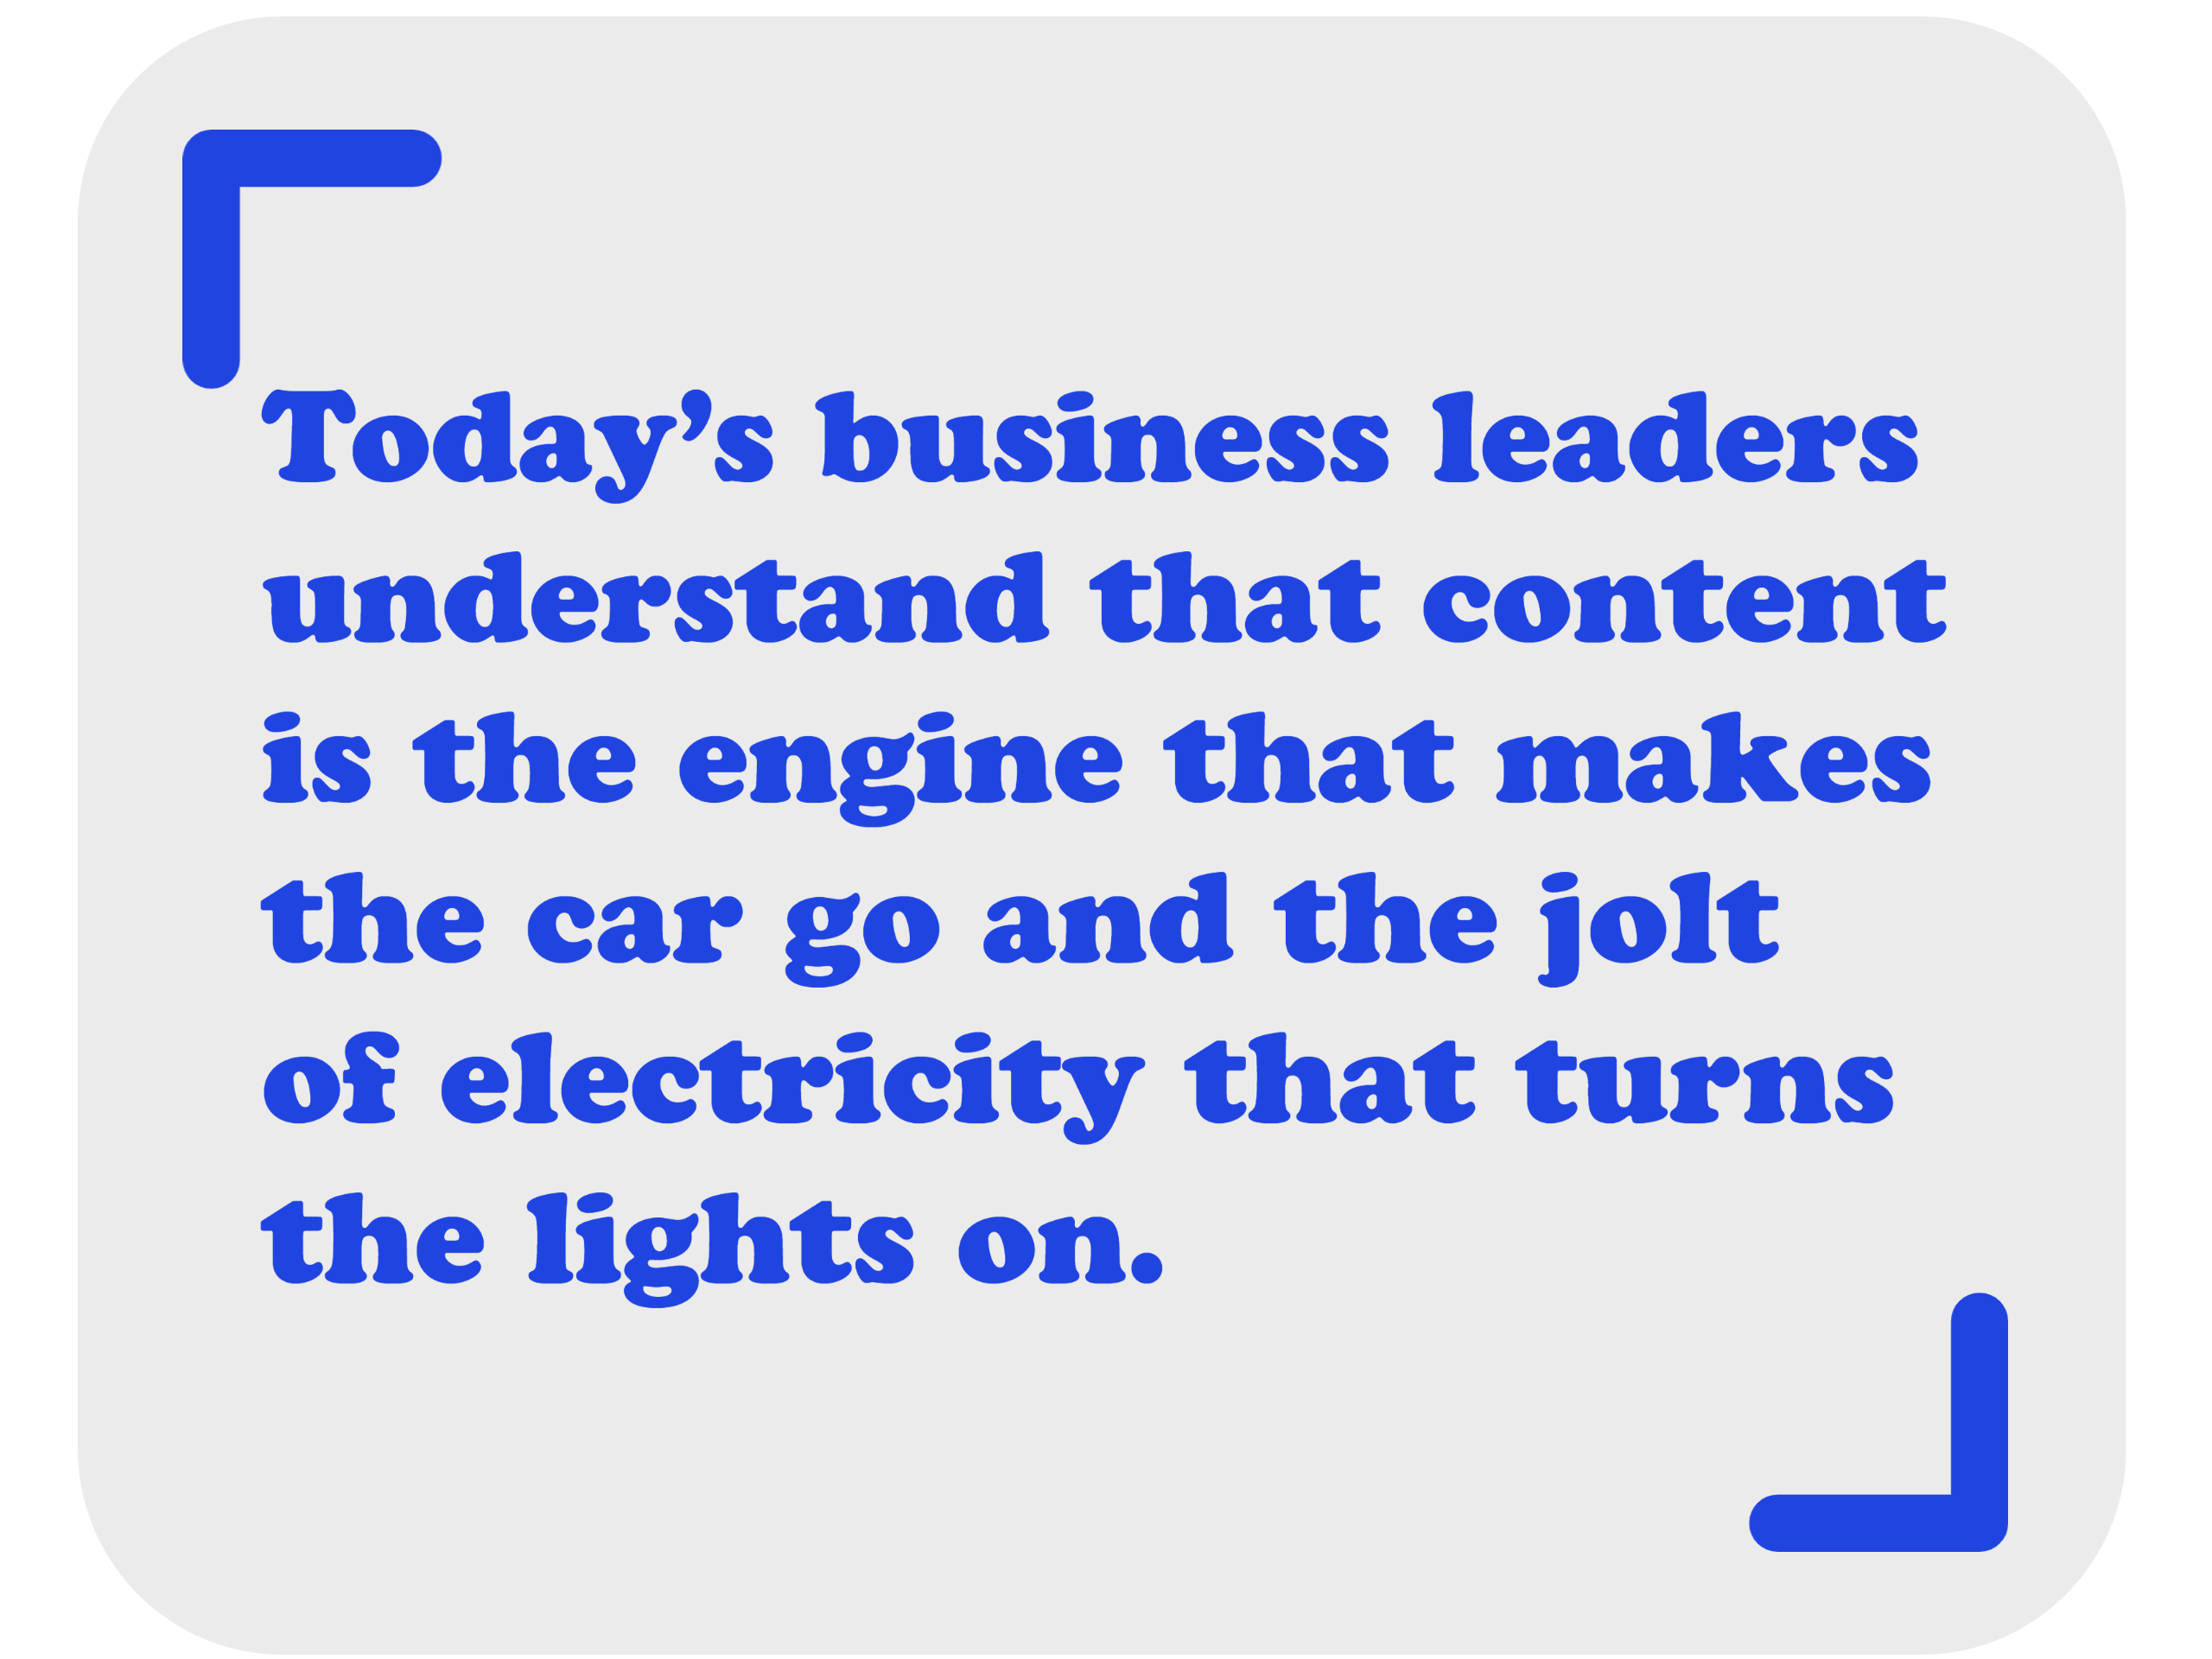 today's business leaders really understand that content is the engine that makes the car go and the jolt of electricity that turns the lights on.